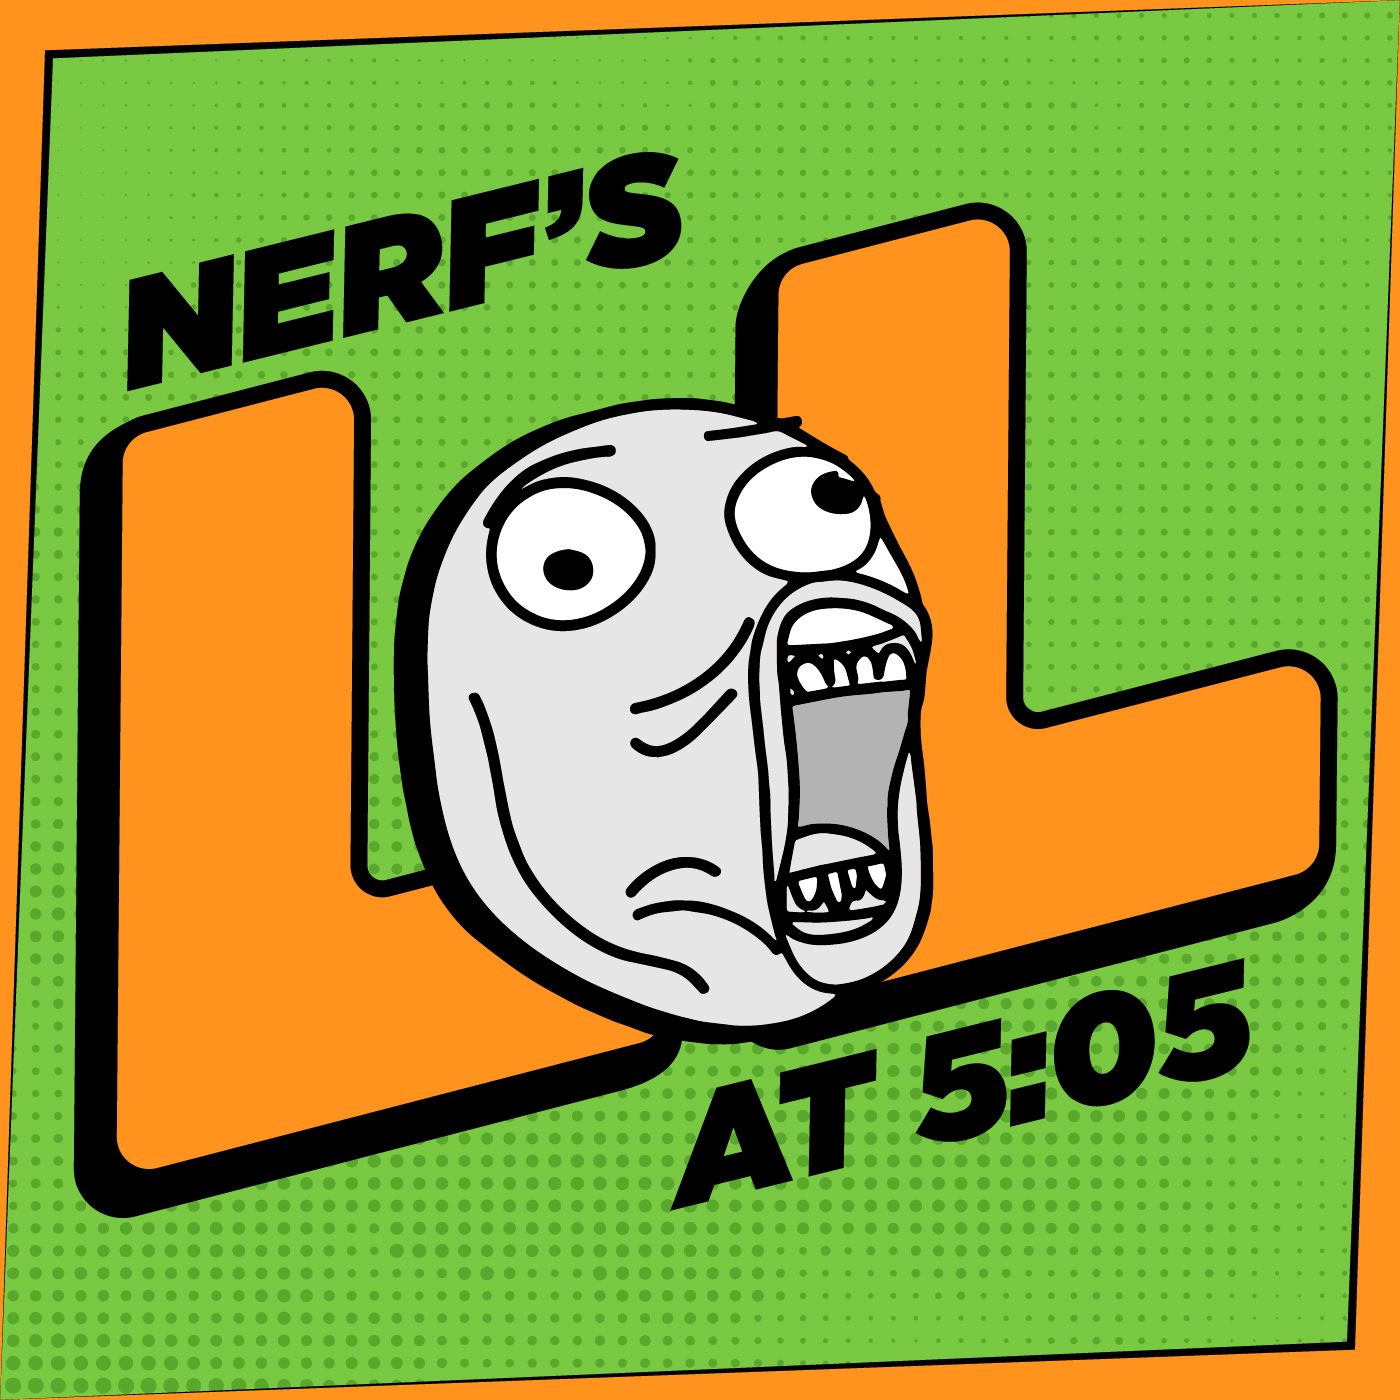 Nerf’s LOLs at 5:05